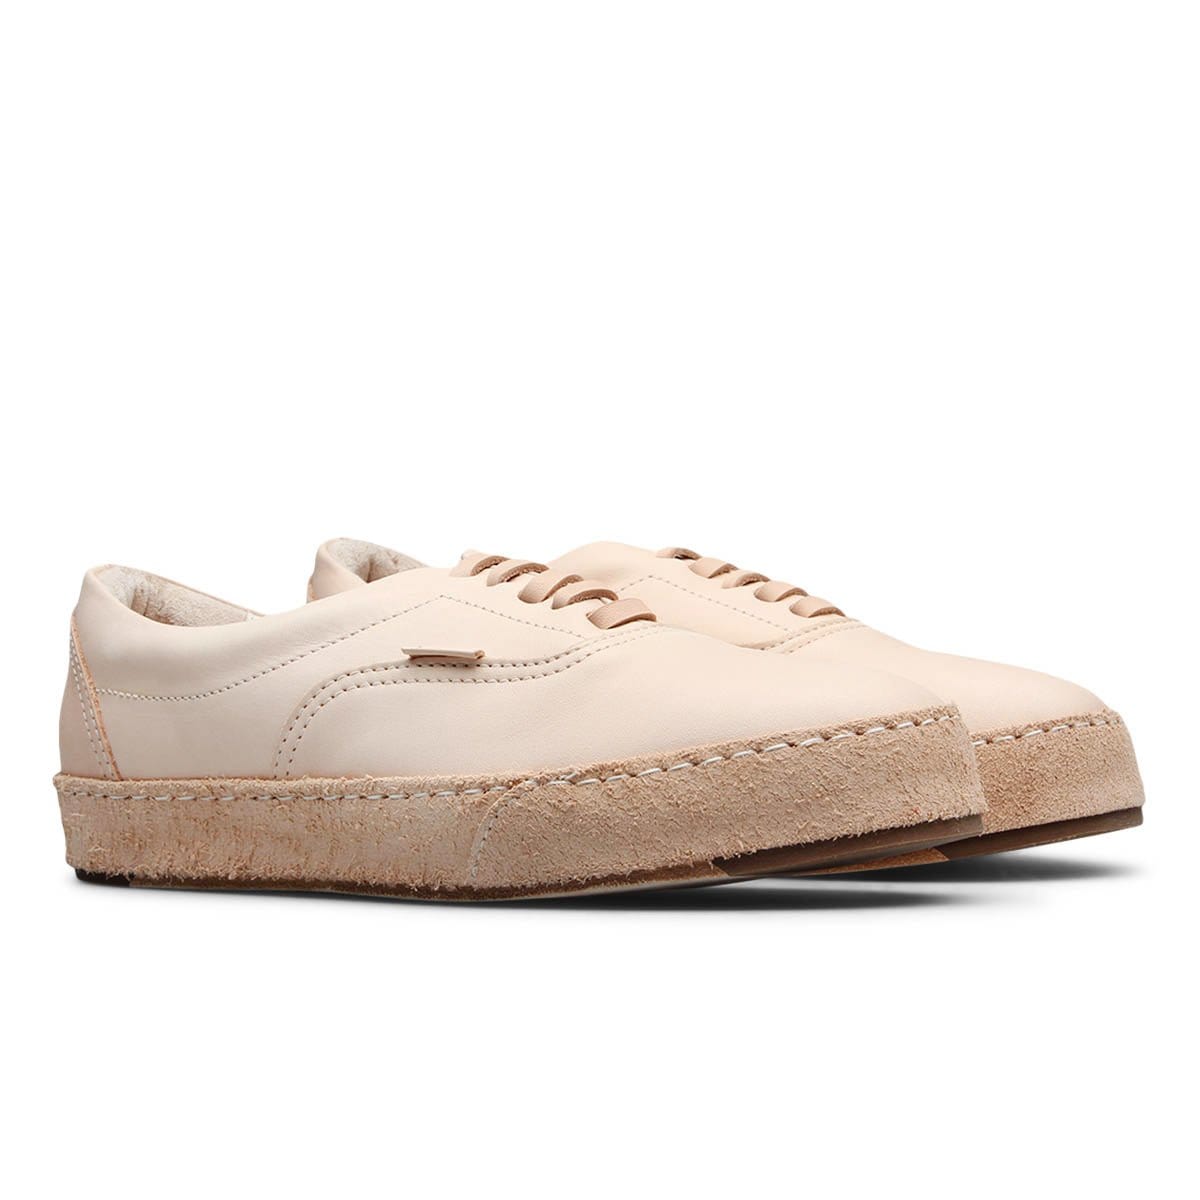 Hender Scheme Shoes MANUAL INDUSTRIAL PRODUCTS 04